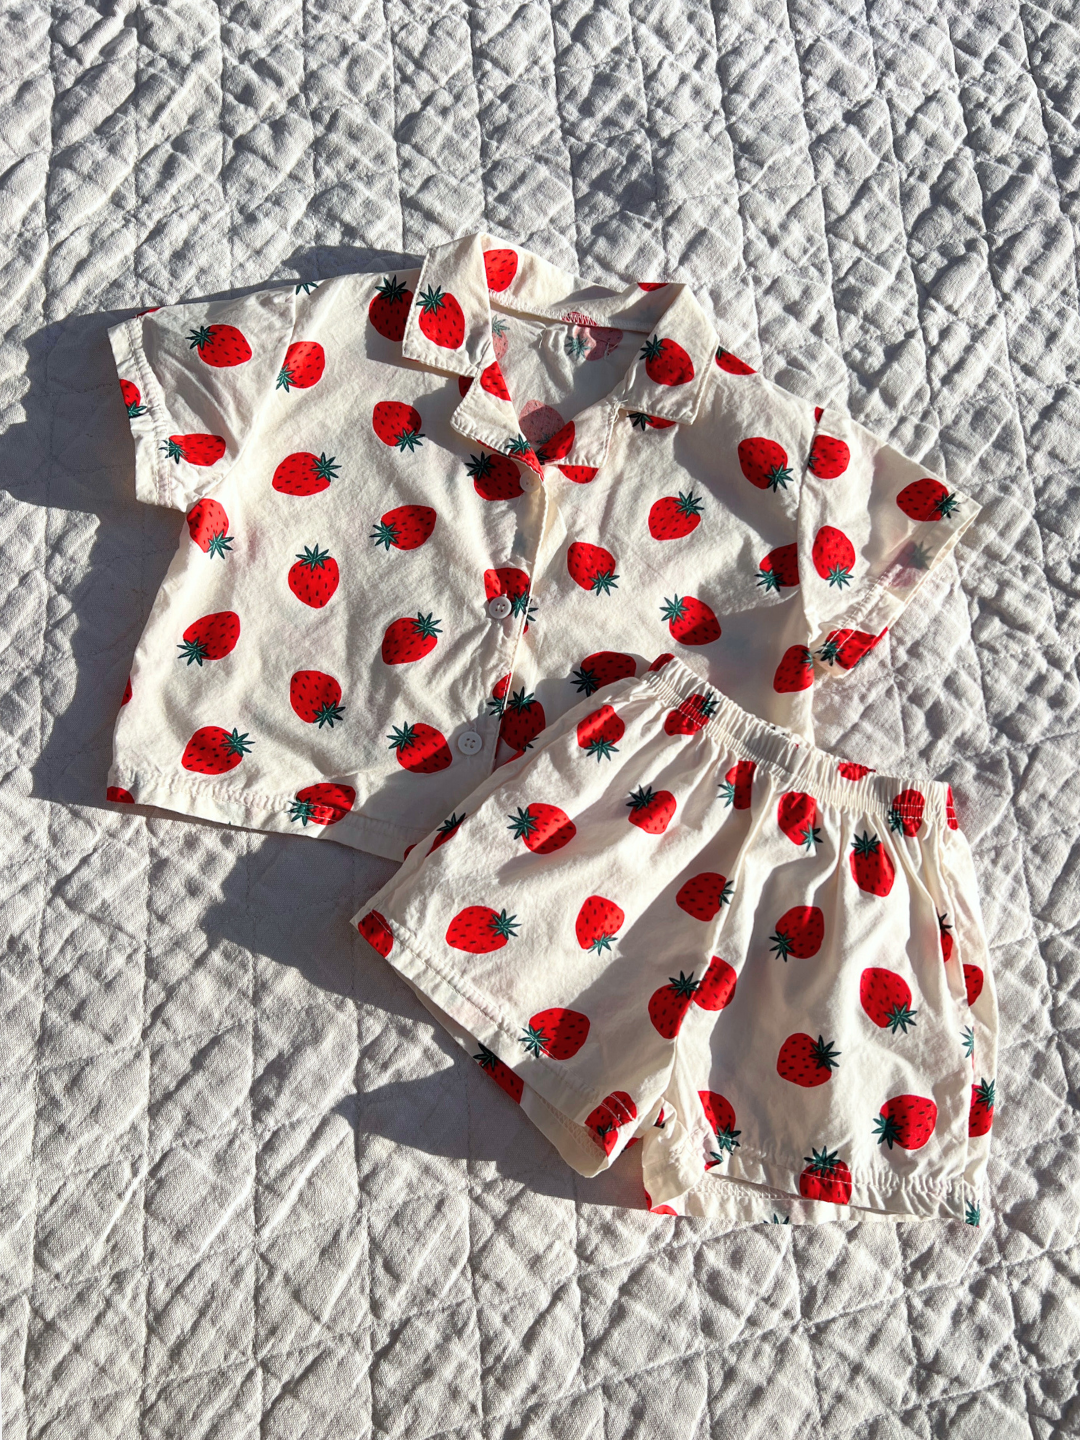 A baby Berry Season Set laid on the quilt in the sun.